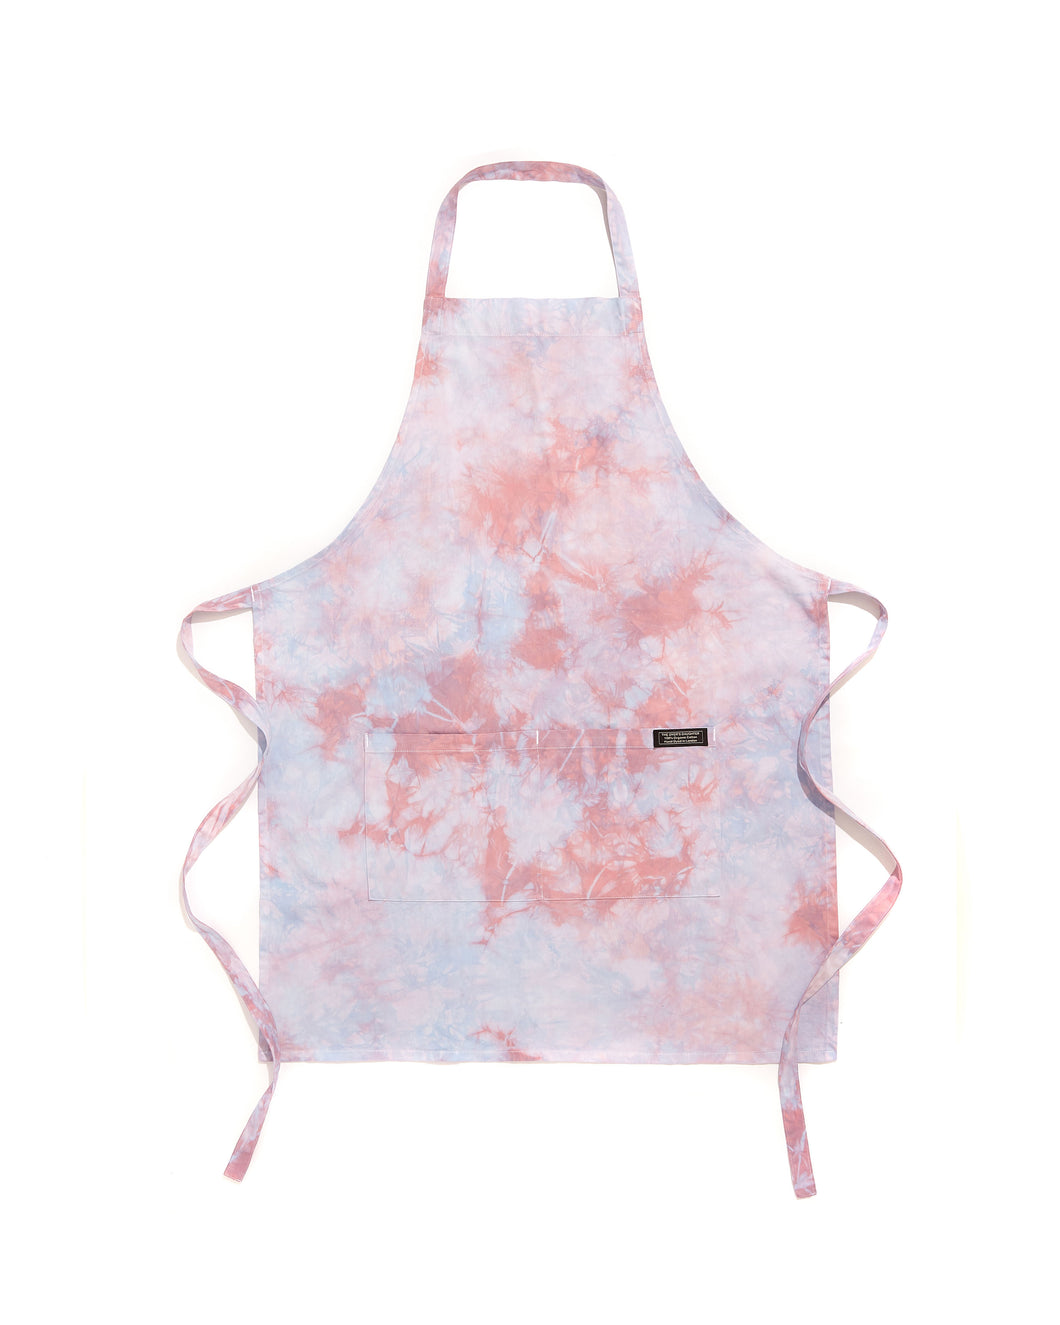 RED SKY ORGANIC HAND-DYED ADULT APRON